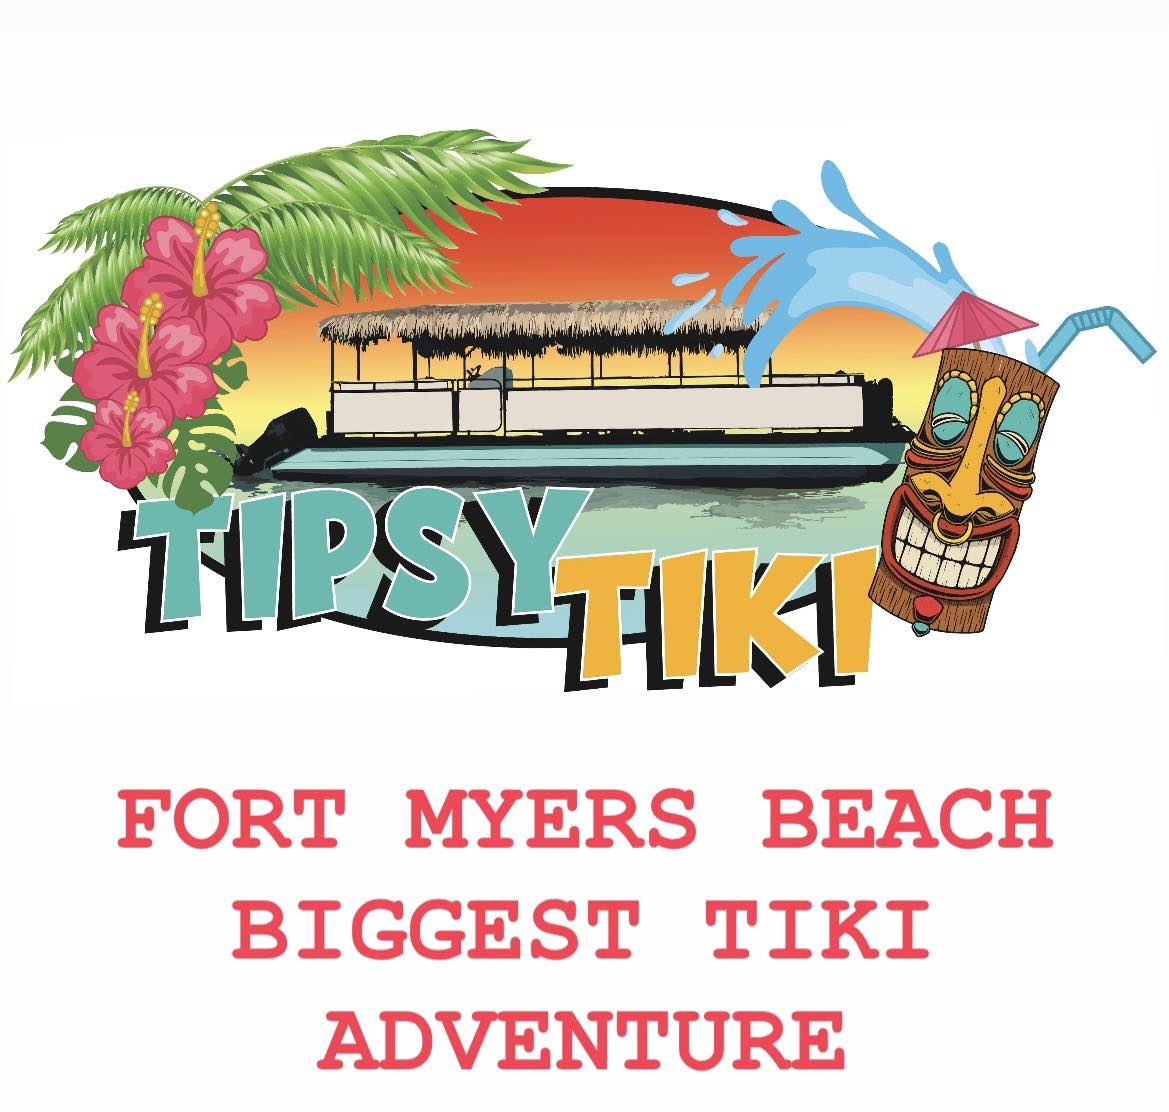 Tipsy Tiki. Fort Myers Beach biggest Tiki Adventure. The one and only floating tiki beer wine & seltzer bar.